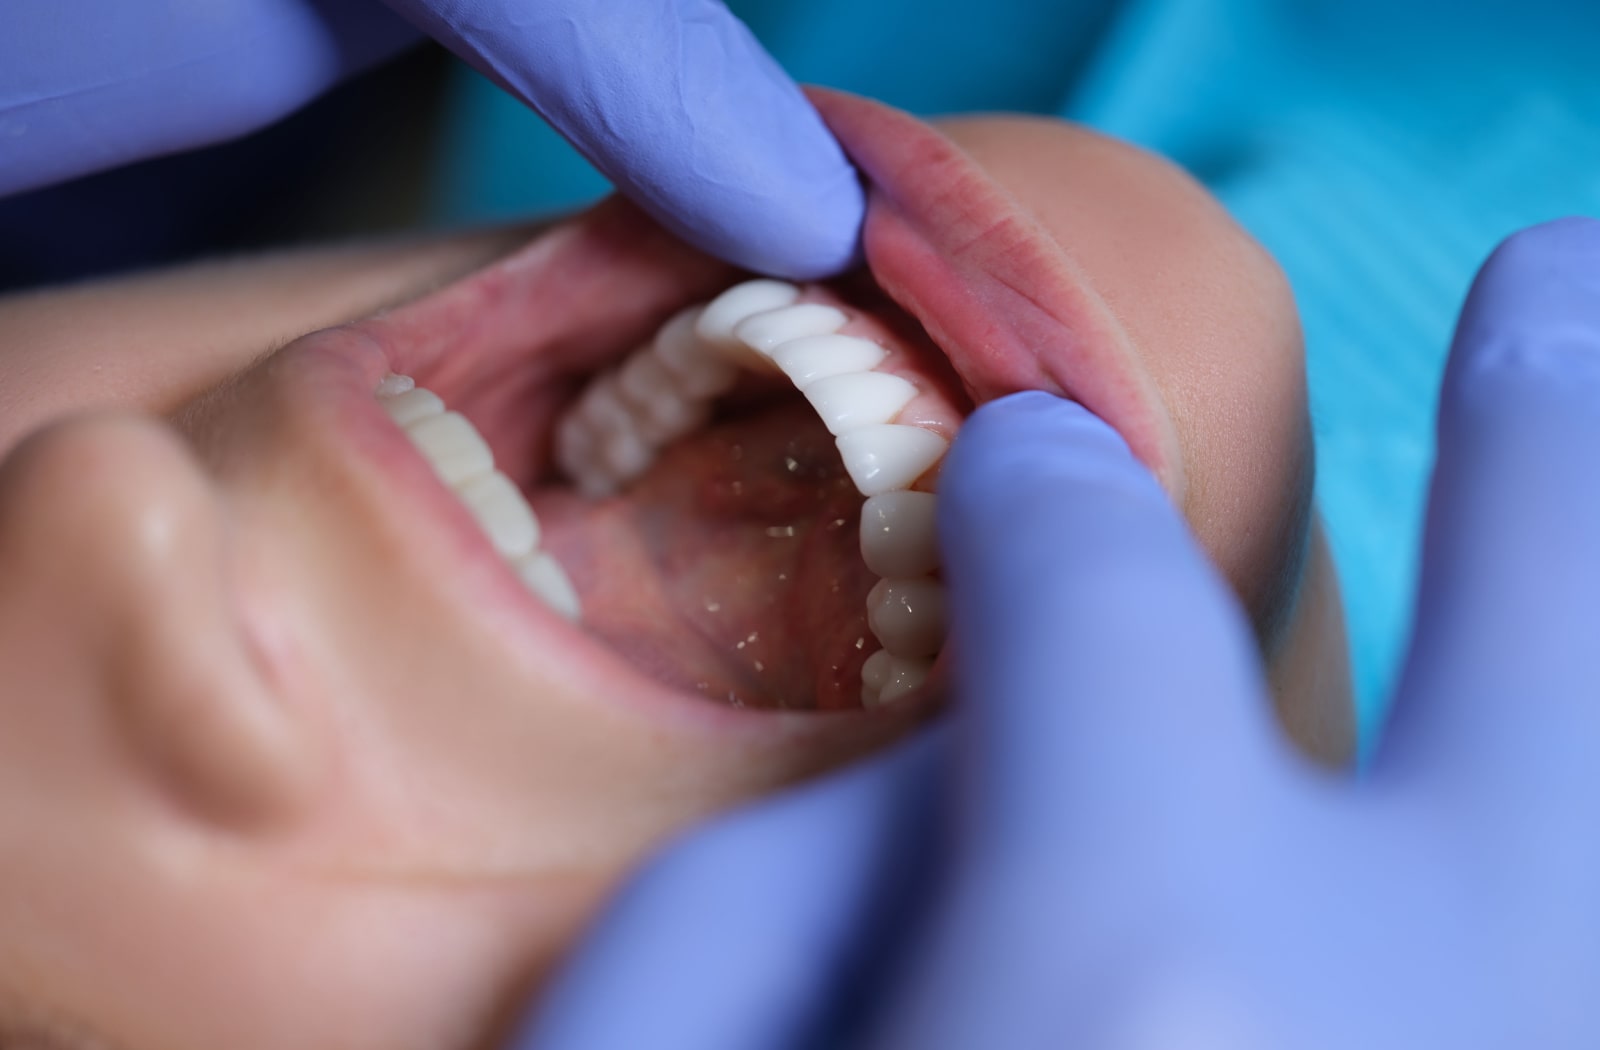 A dentist looks inside a patient's mouth to check for any cavities